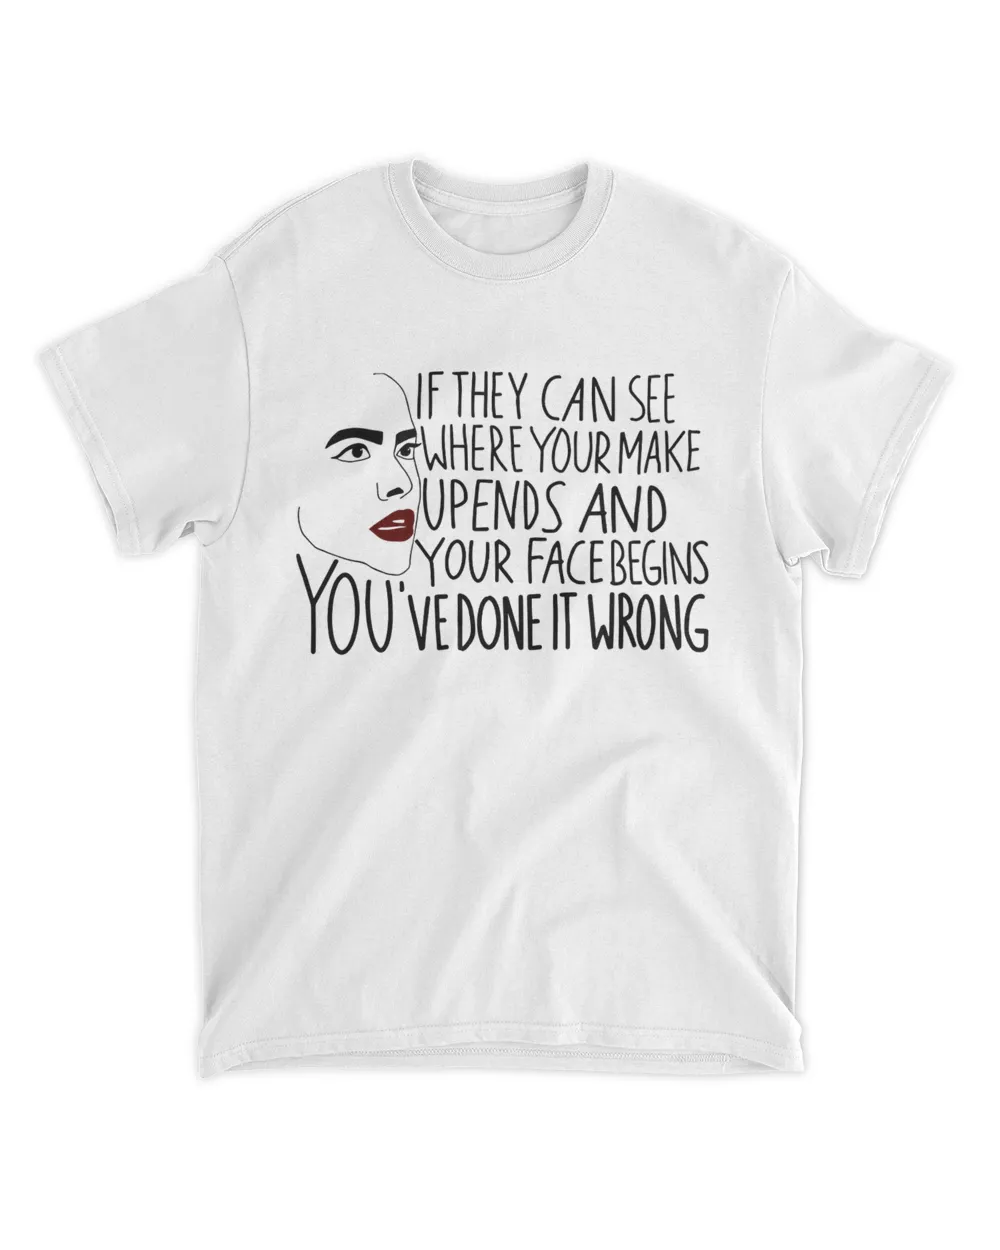 If They Can See Where Your Make Upends And Your Face Begins You've Done It Wrong Shirt